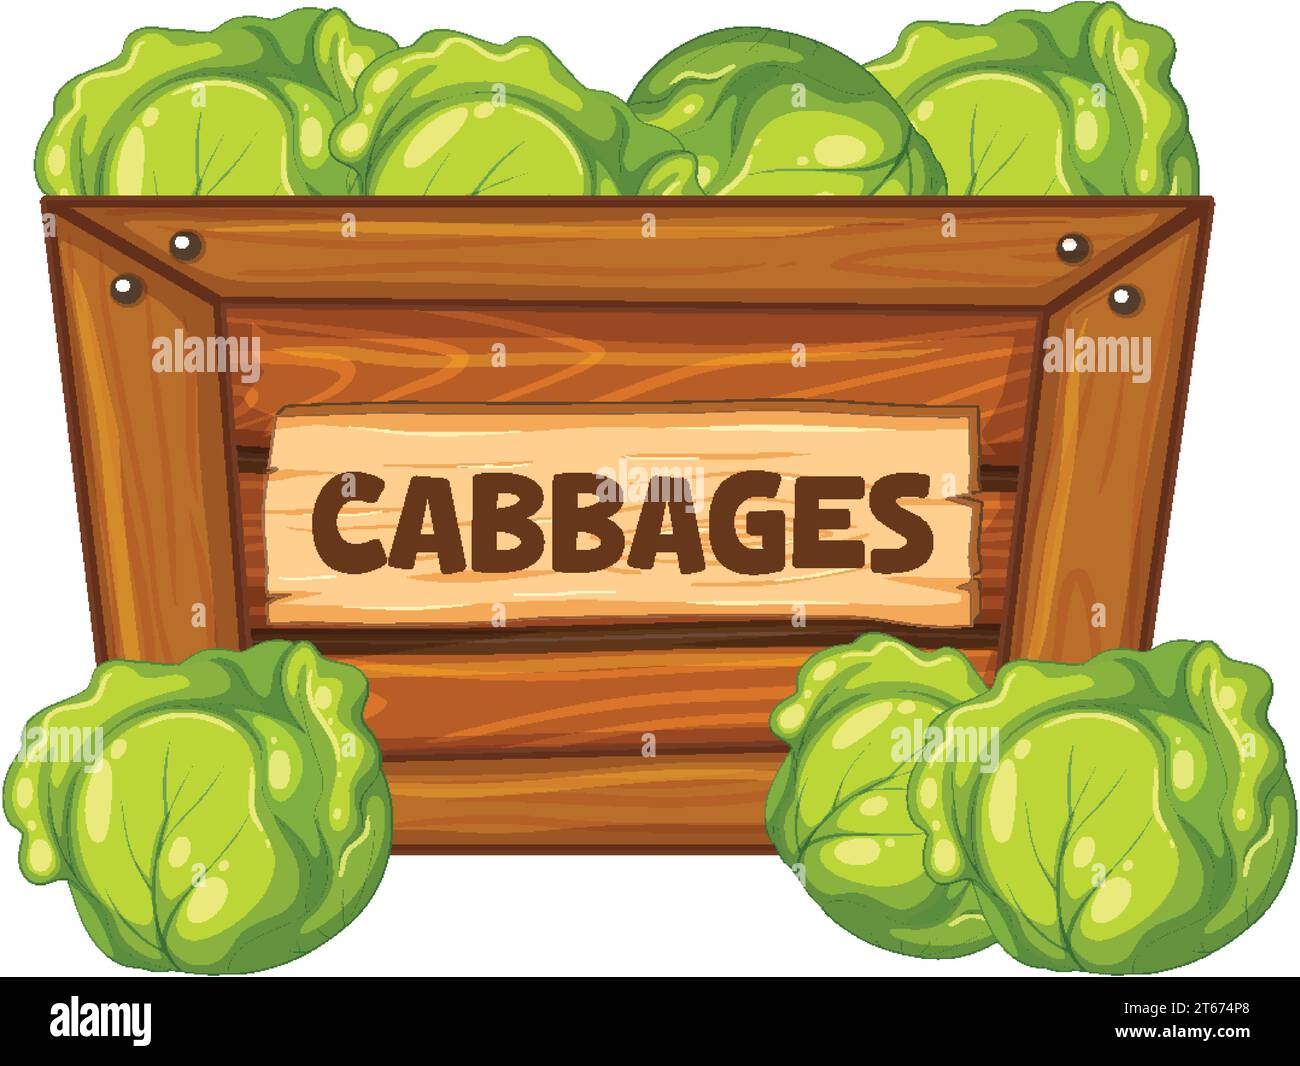 Colorful cabbages displayed in a wooden box with a sign banner Stock Vector